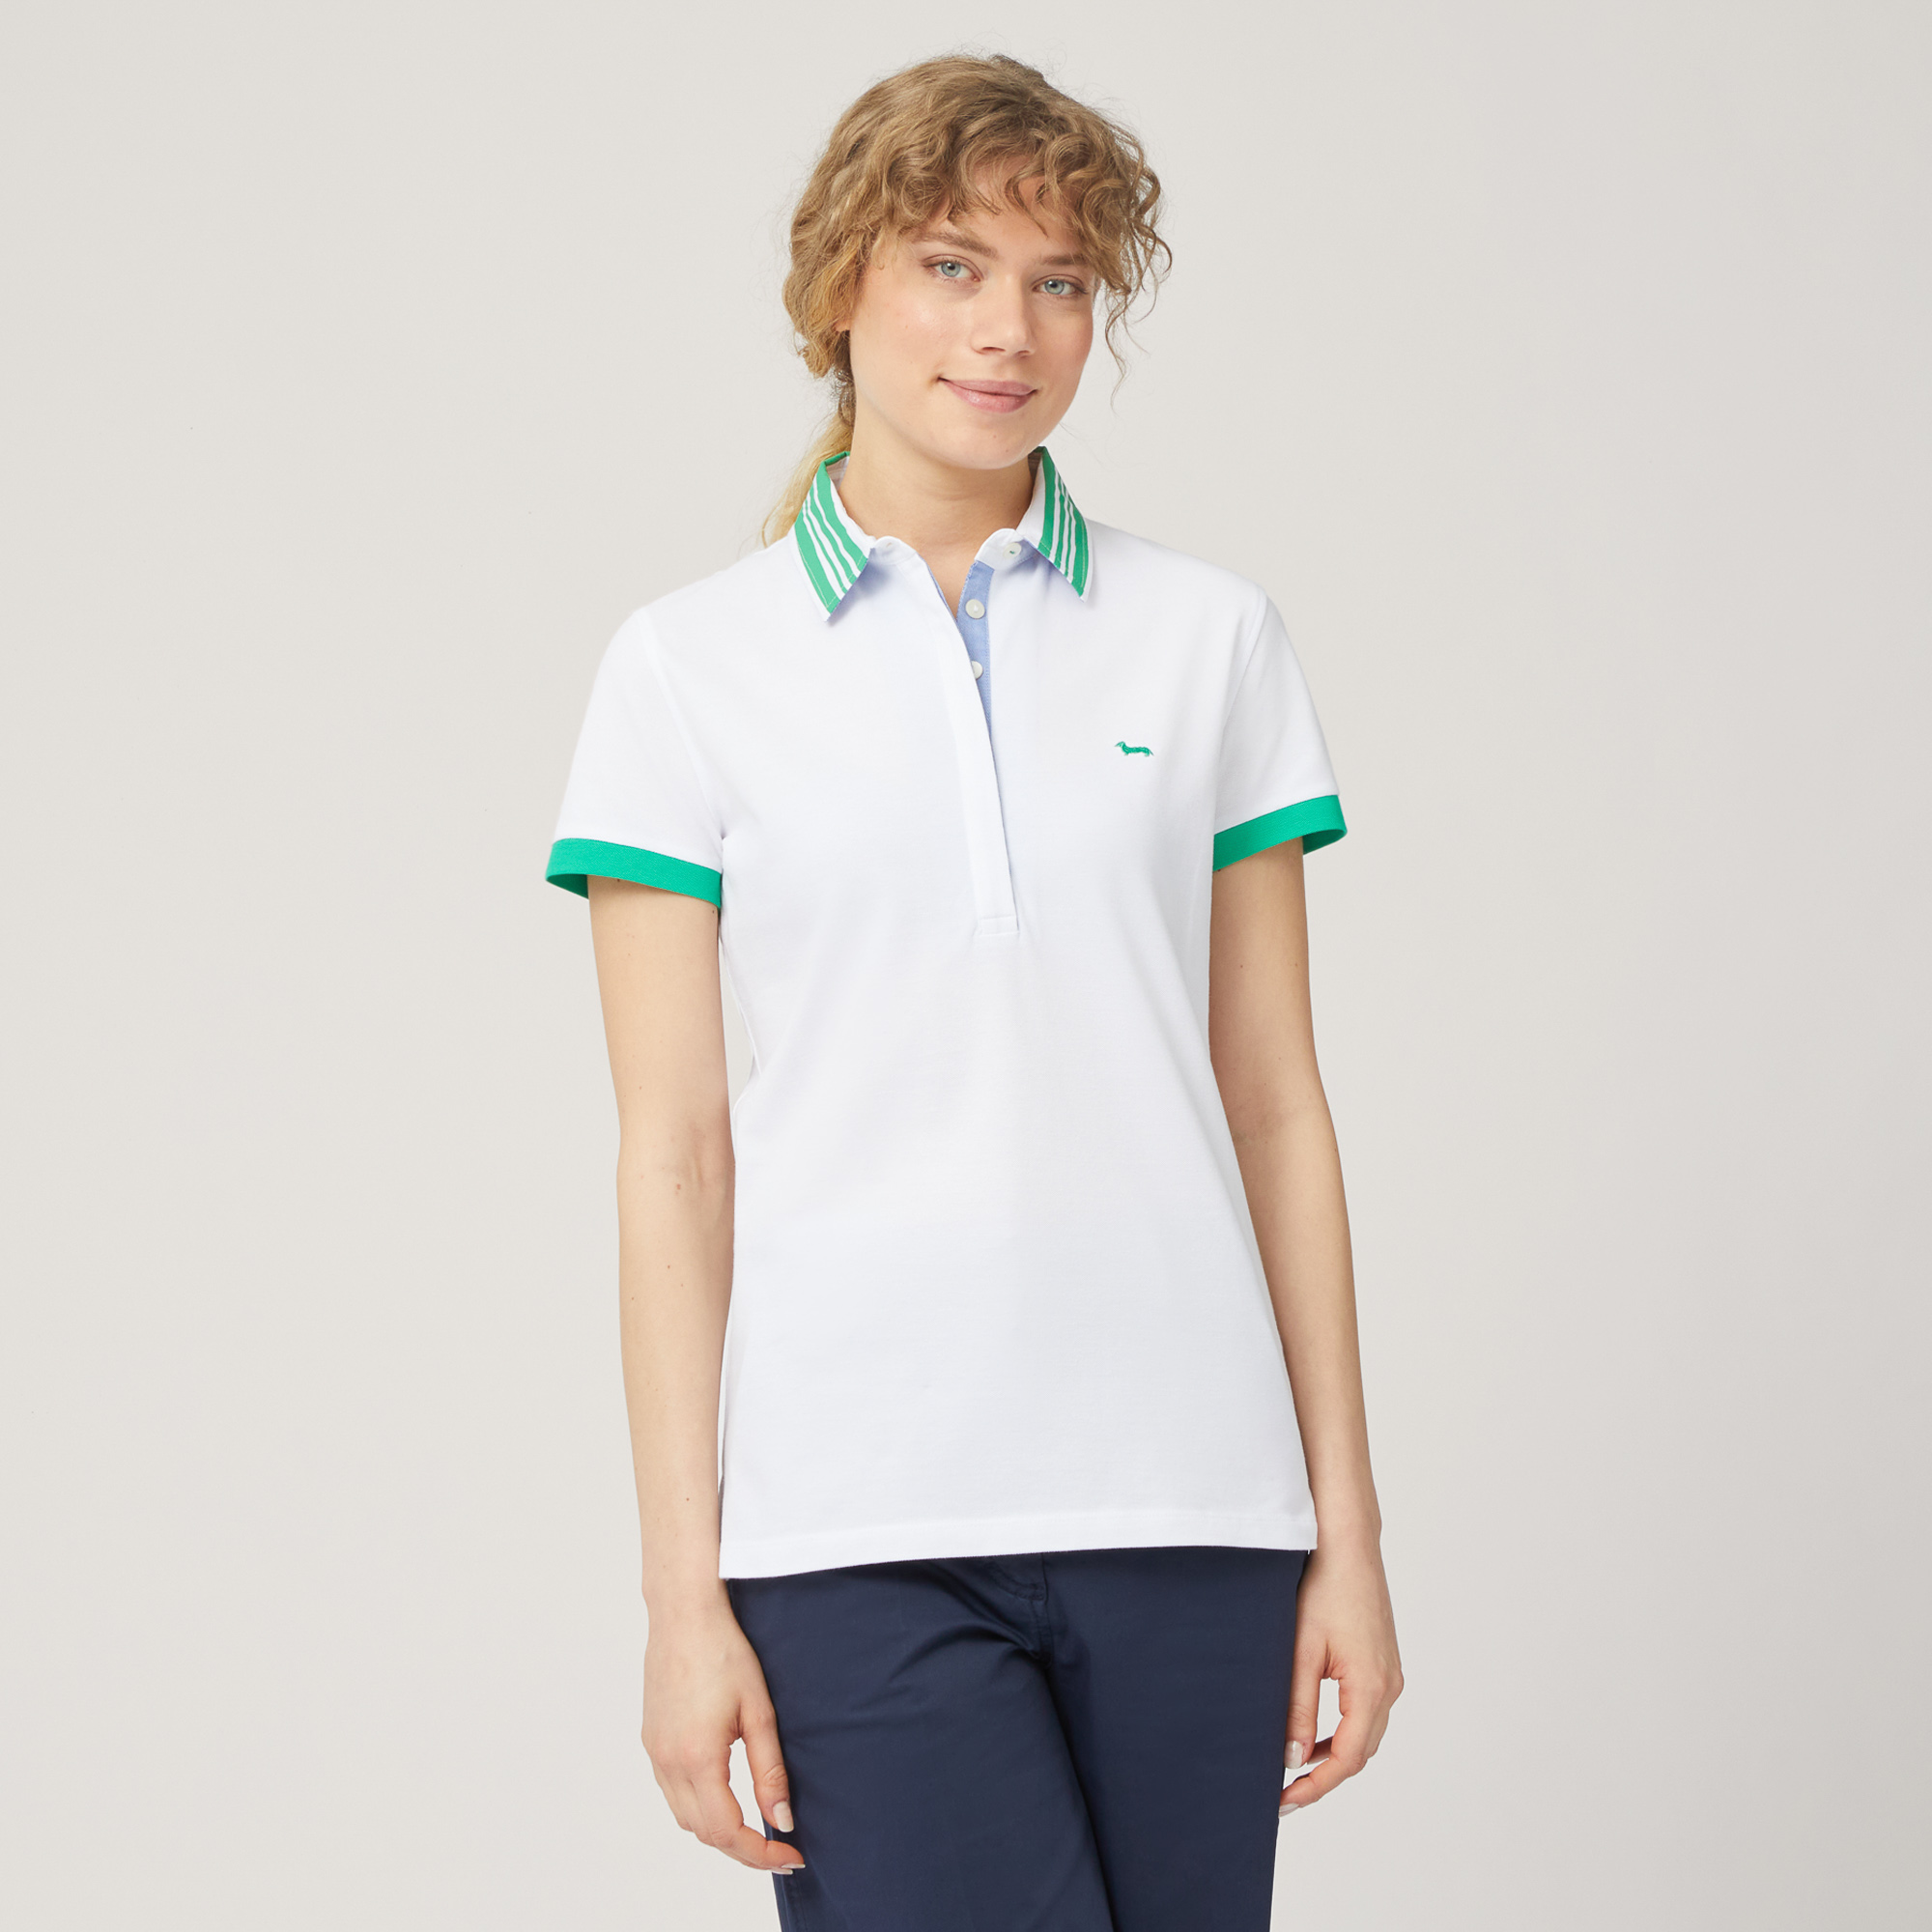 Vietri Polo Shirt with Printed Collar, White, large image number 0